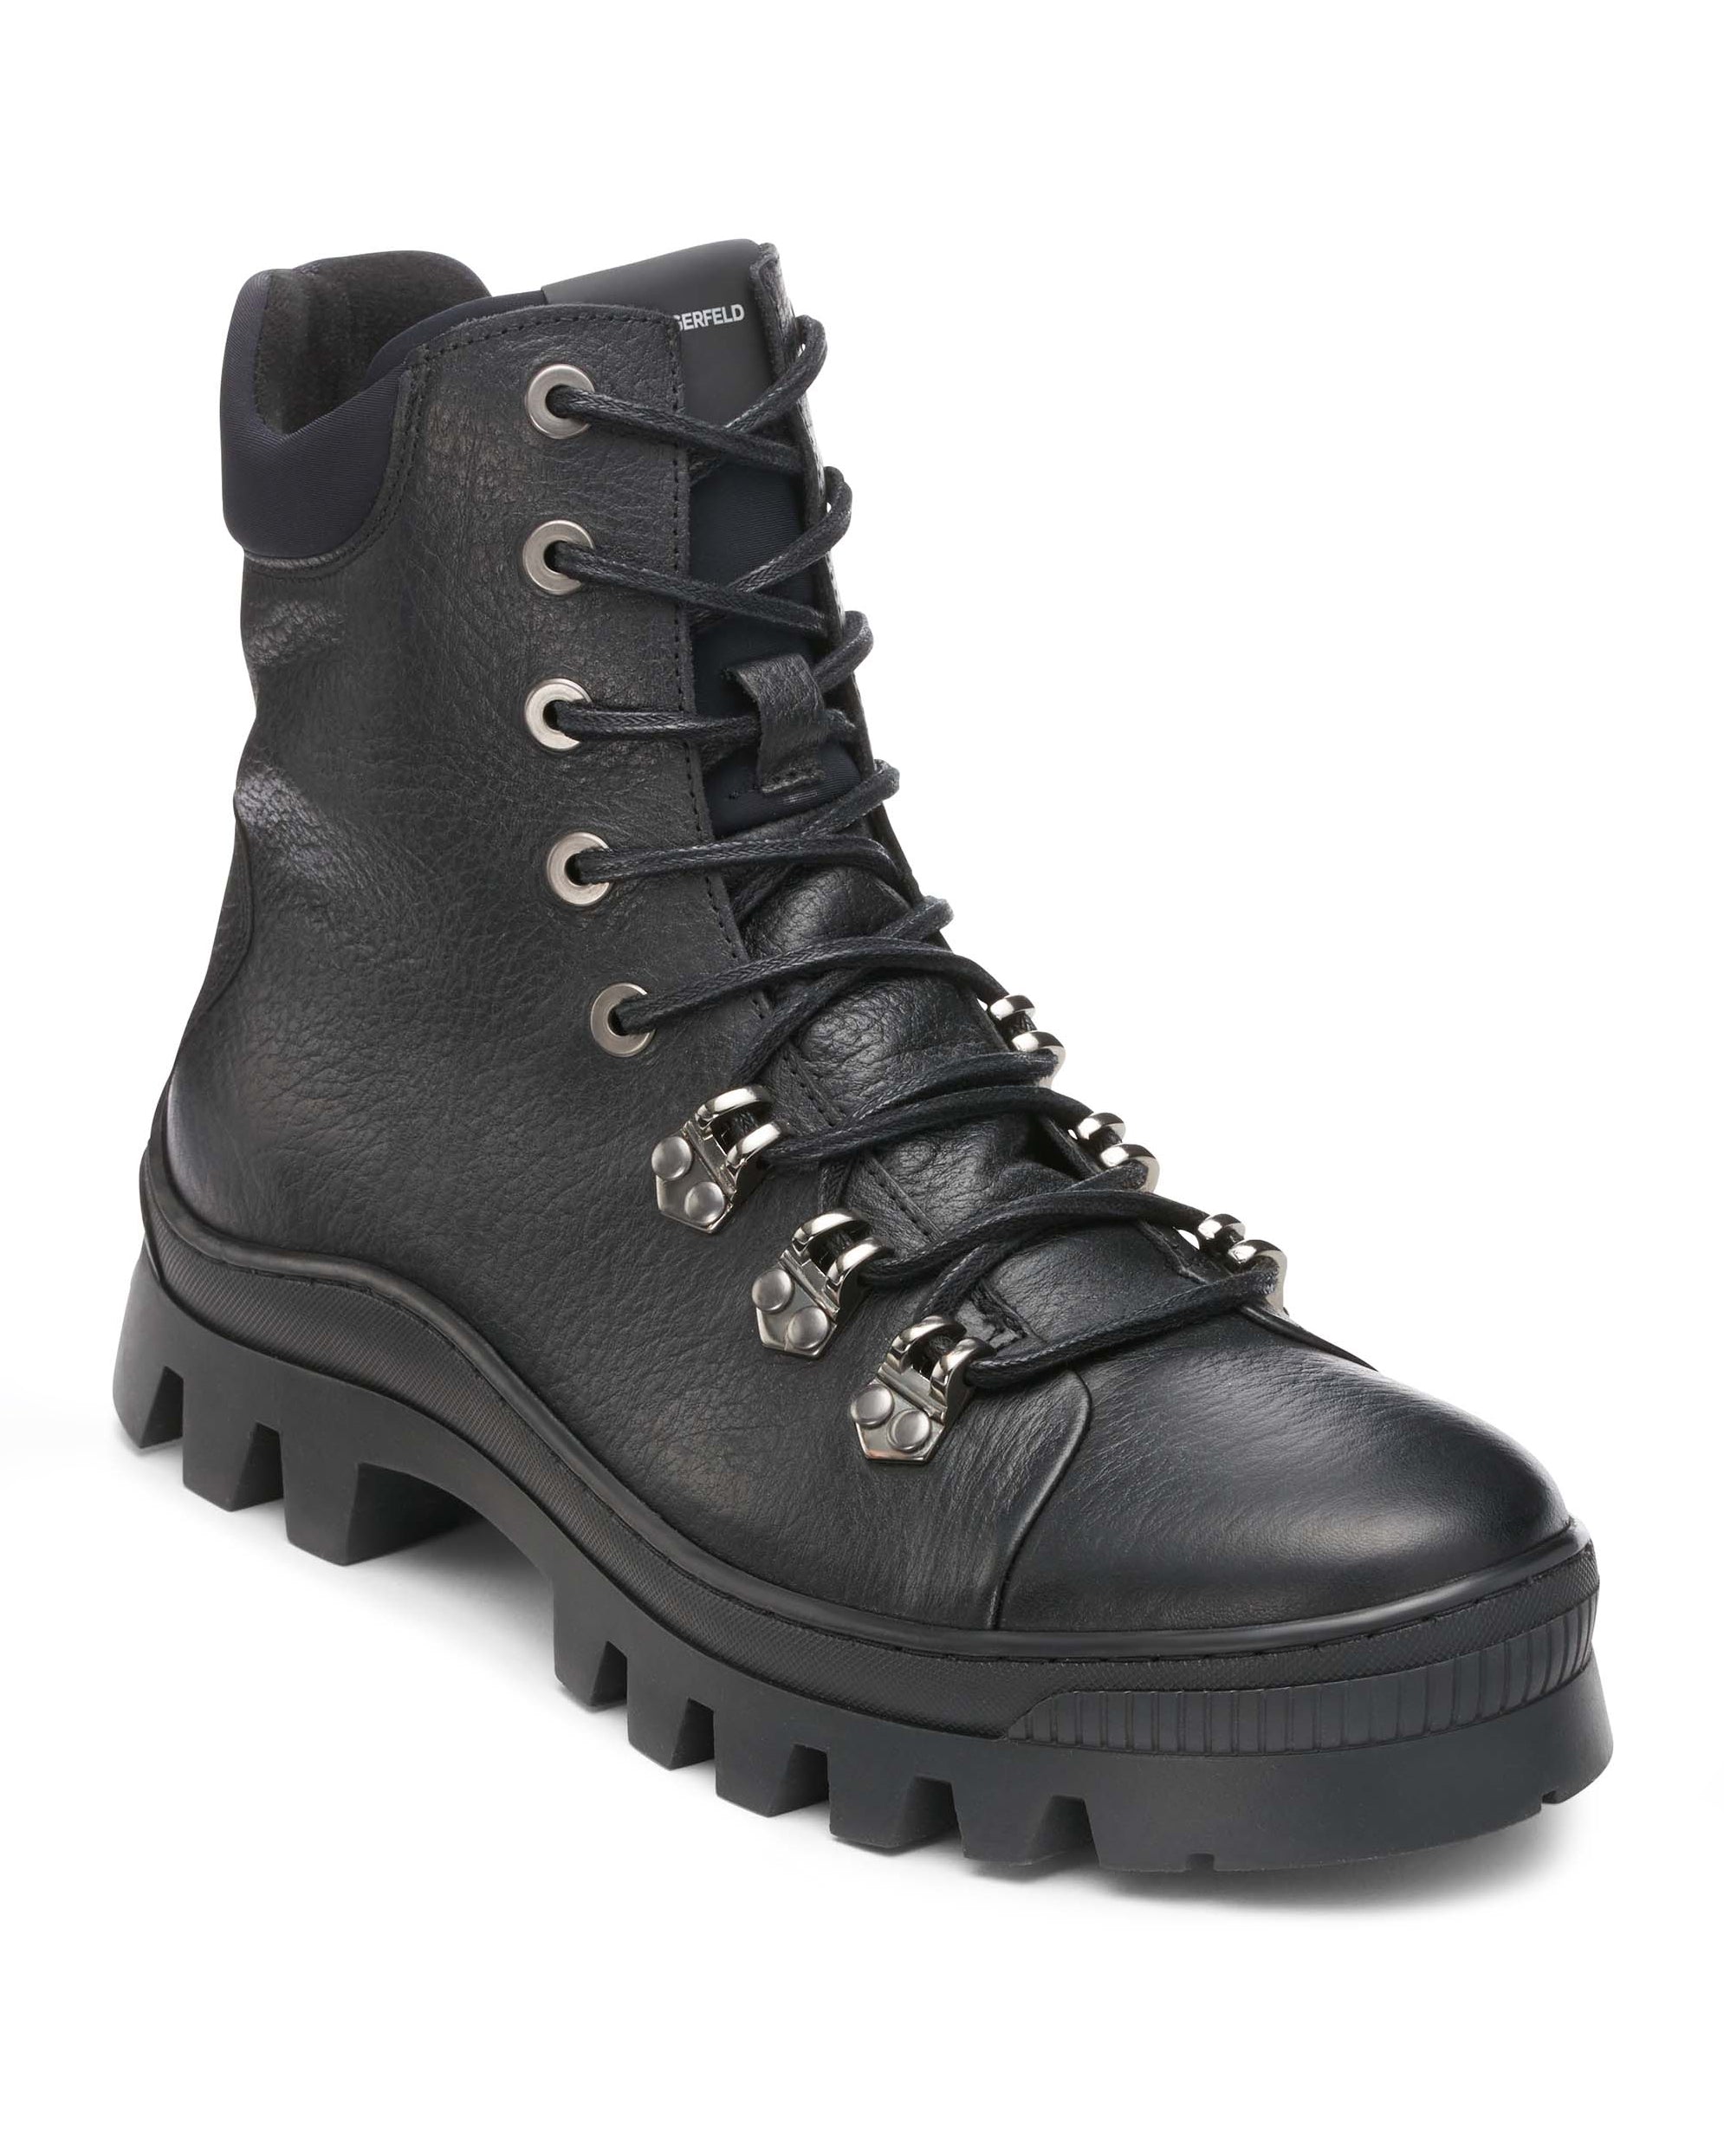 SMOOTH LEATHER HIKER BOOT Karl Lagerfeld Paris